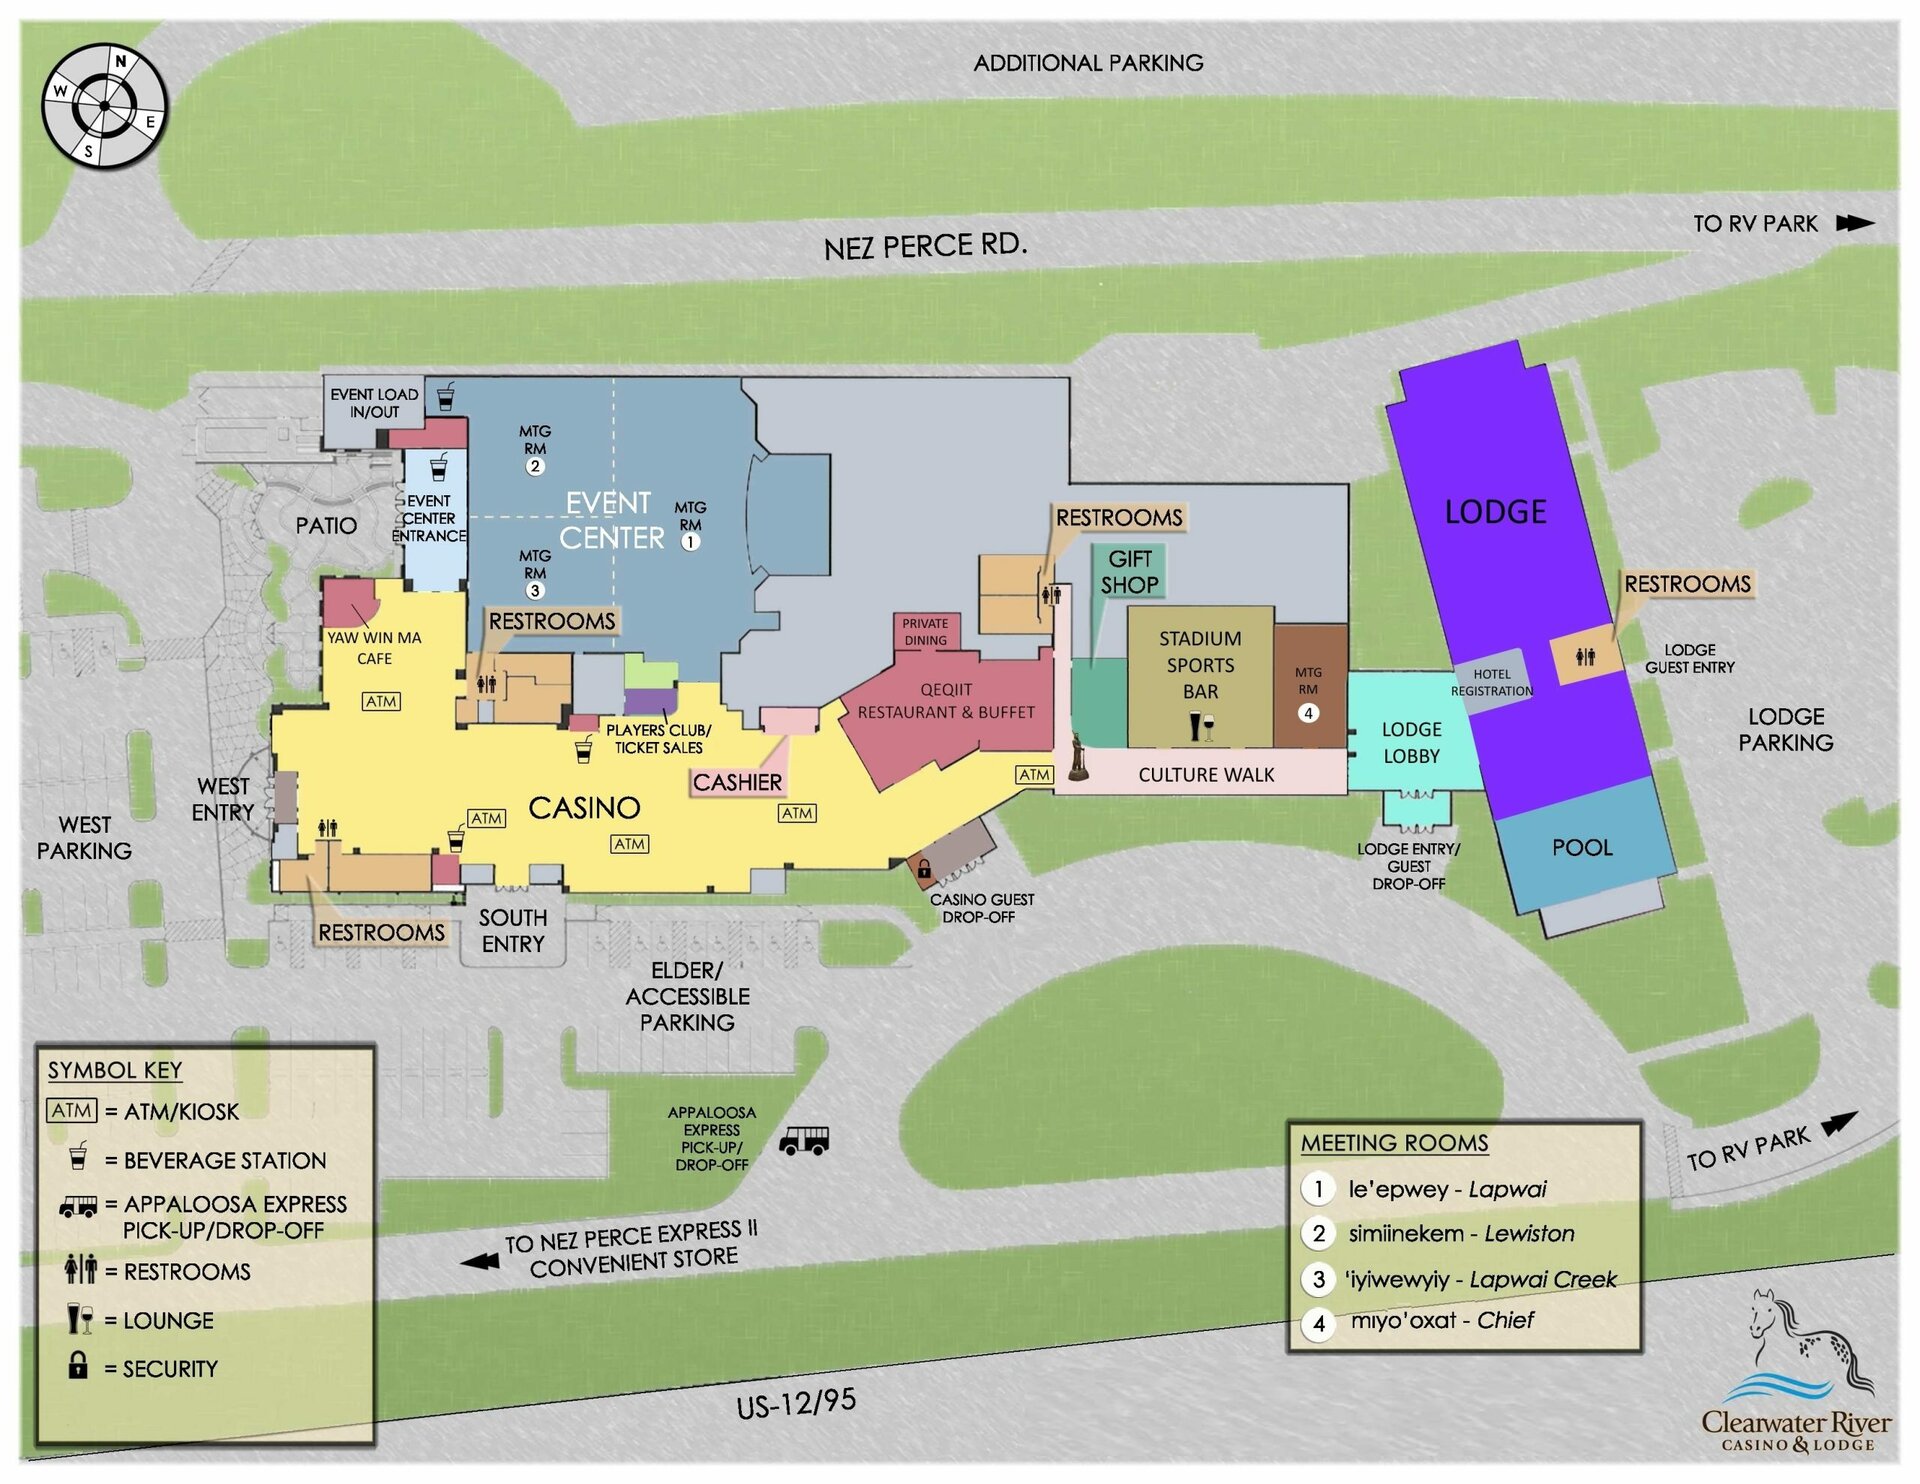 Map of the Clearwater River Casino, the location for the Nation Building Conference.